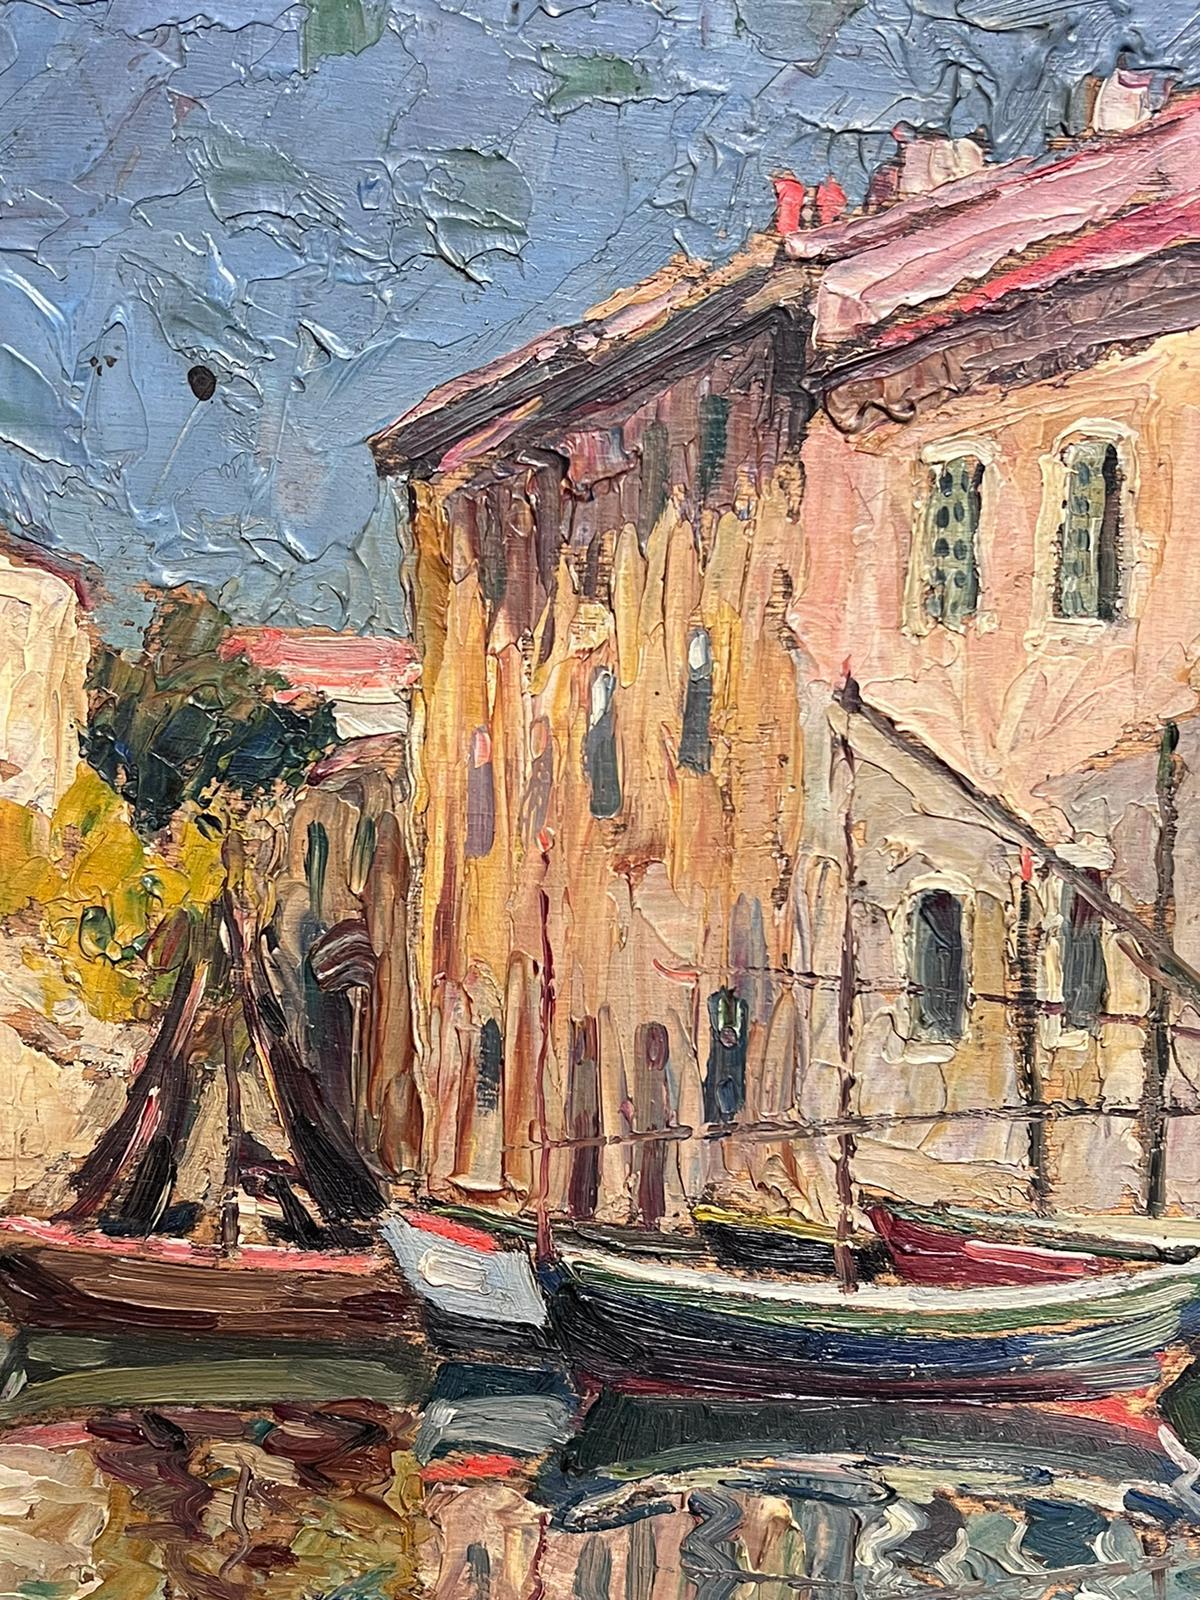 St Tropez Harbor Boats Moored Sleep Sunny French Old Town 1950's Impressionist For Sale 2